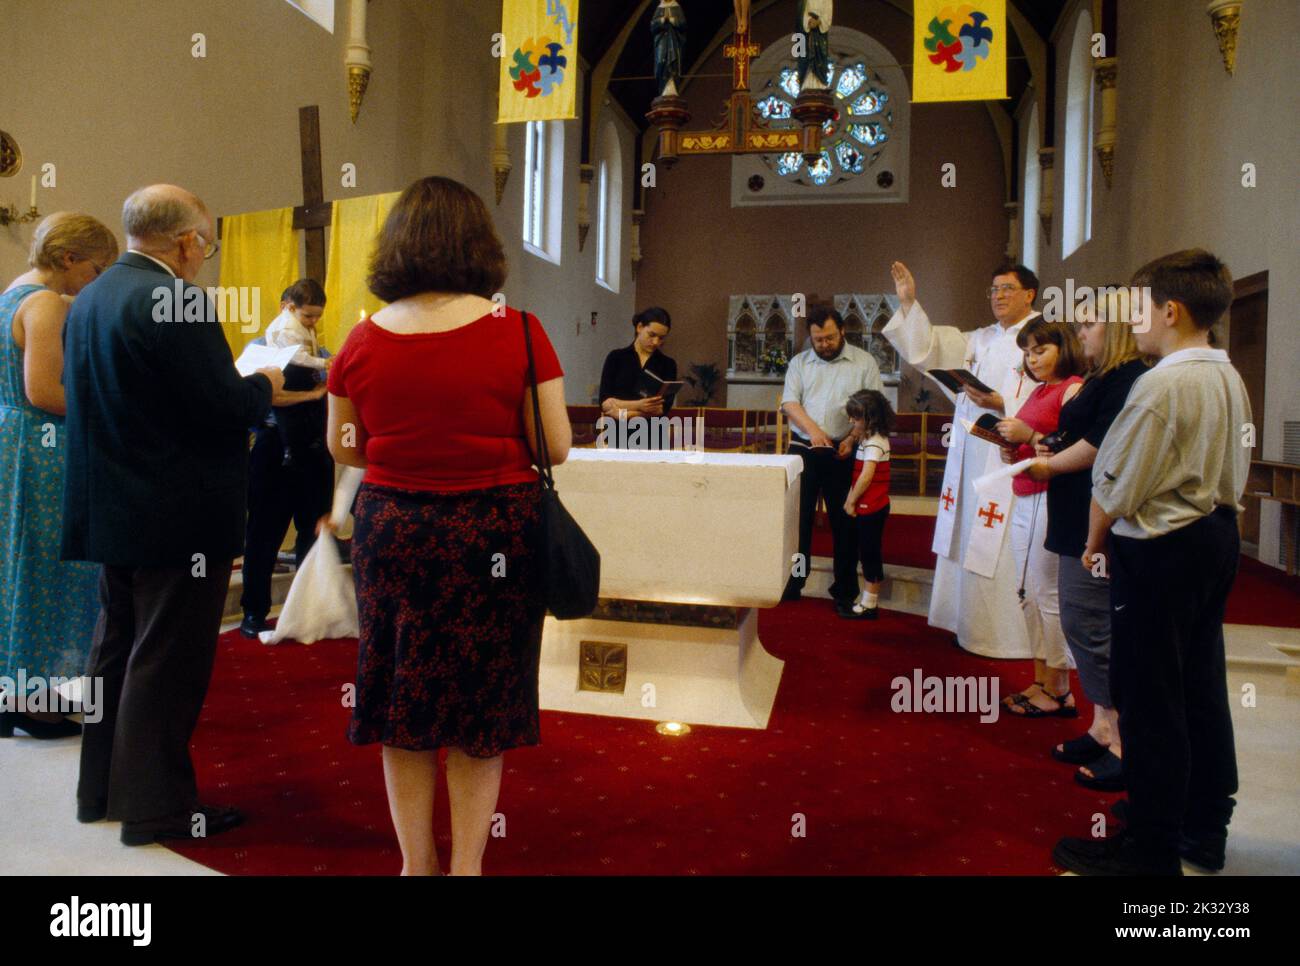 Baptism Priest Giving  Final Blessing At End Of Service St Joseph's Catholic Church Roehampton London England Stock Photo